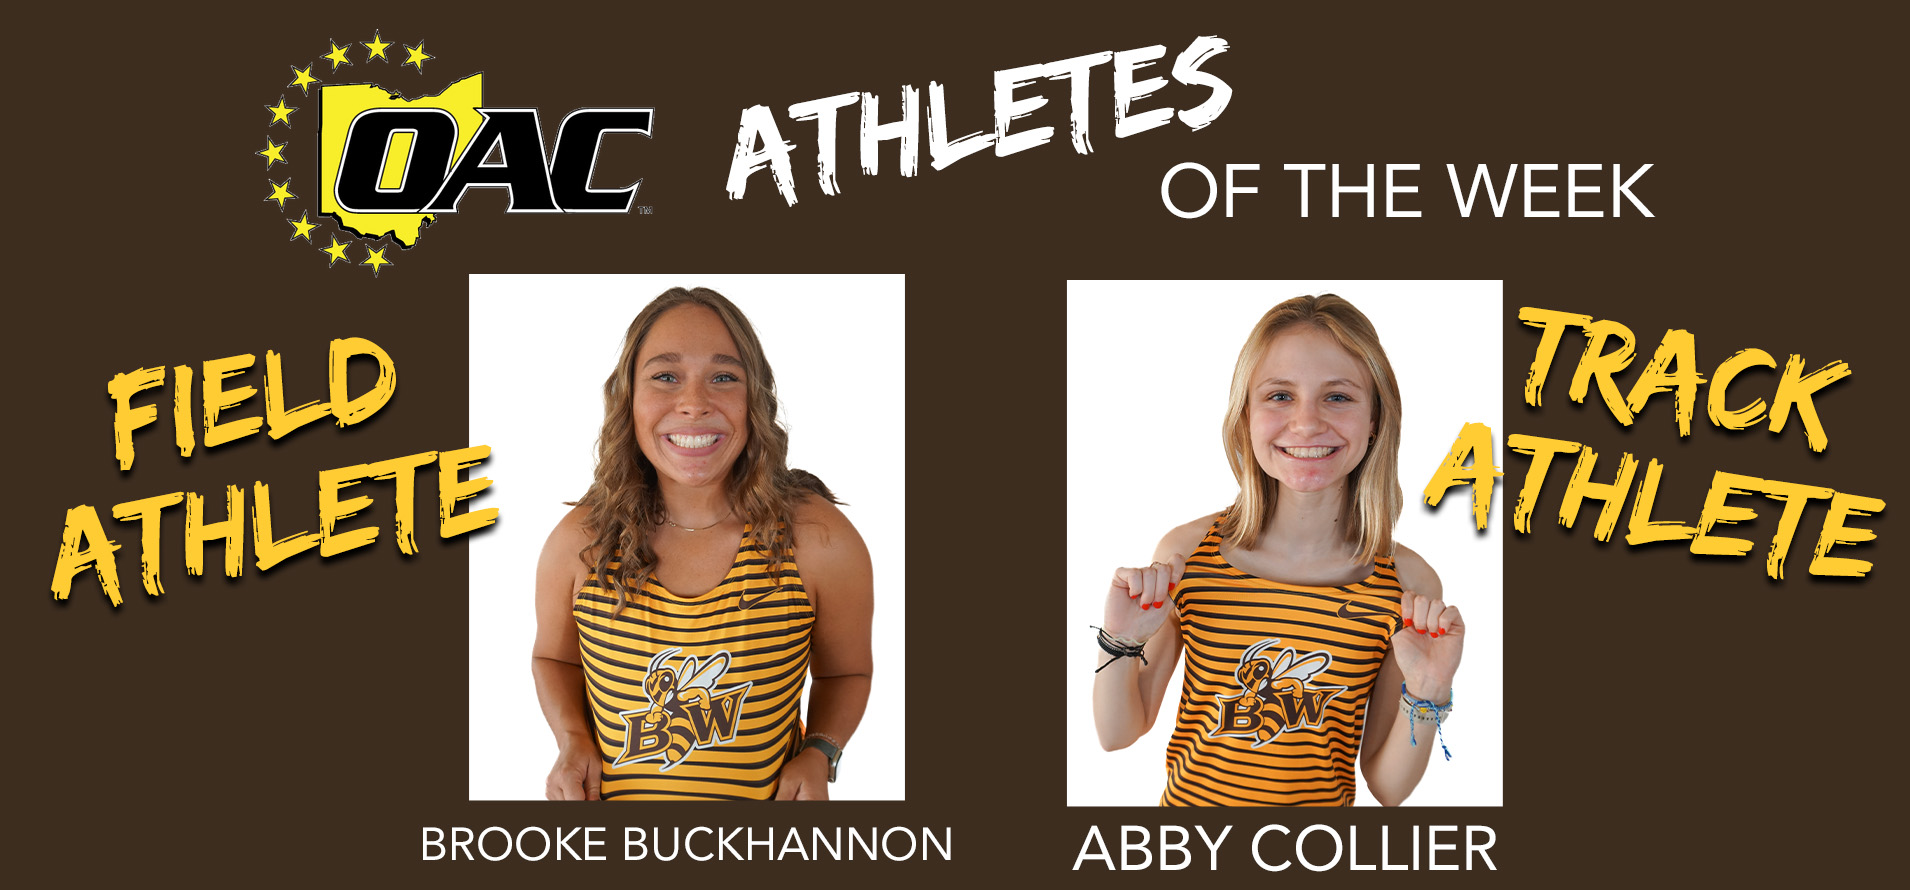 Buckhannon and Collier Earn OAC Women's Outdoor Track and Field Athlete of the Week Honors